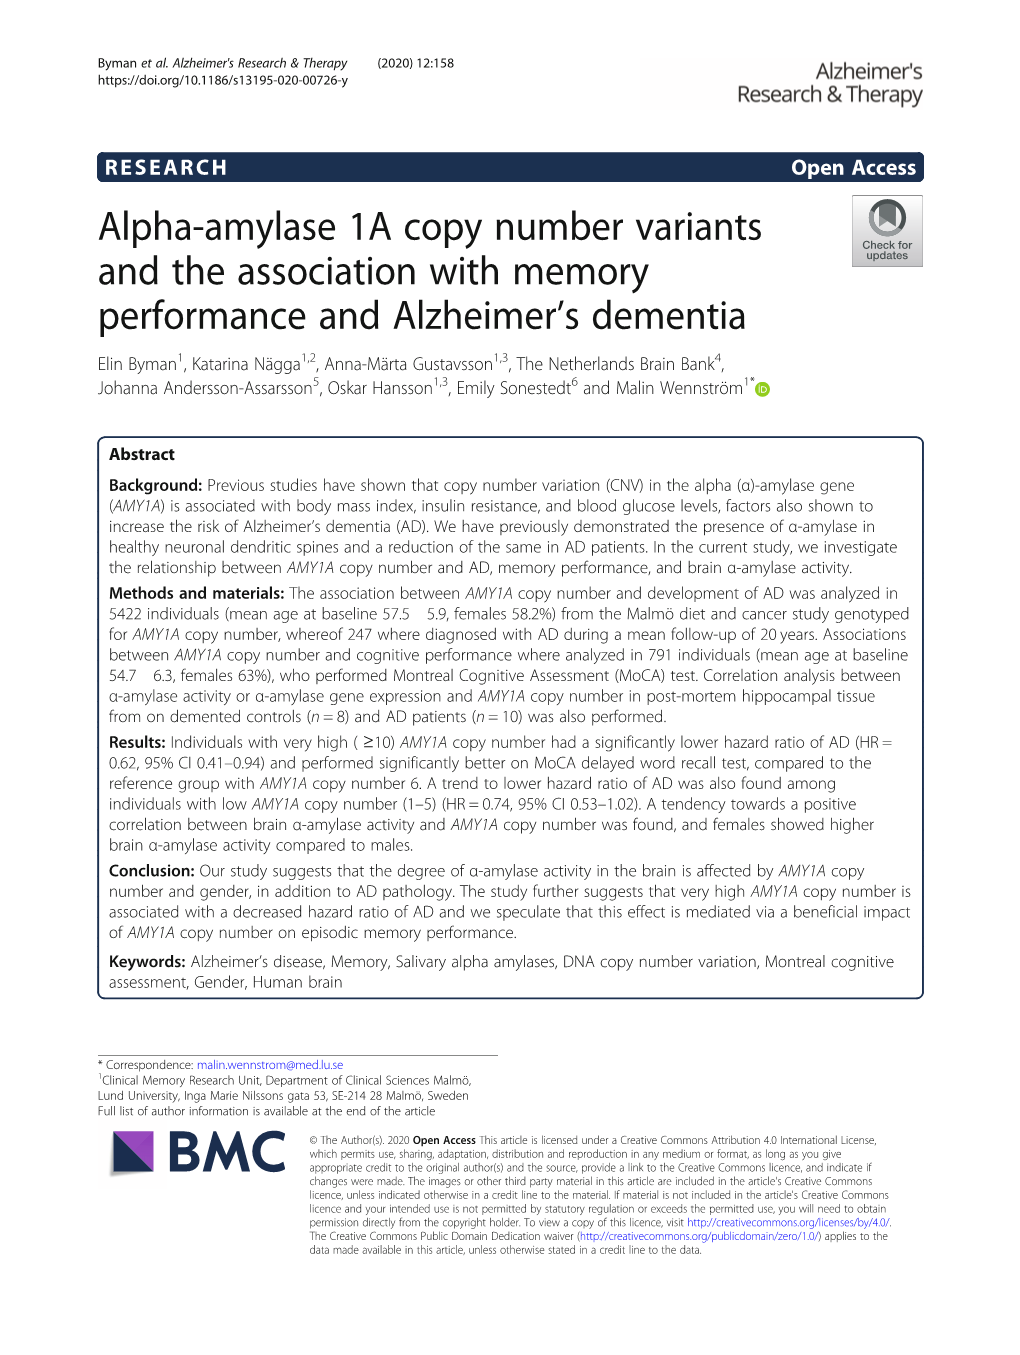 Alpha-Amylase 1A Copy Number Variants and the Association With